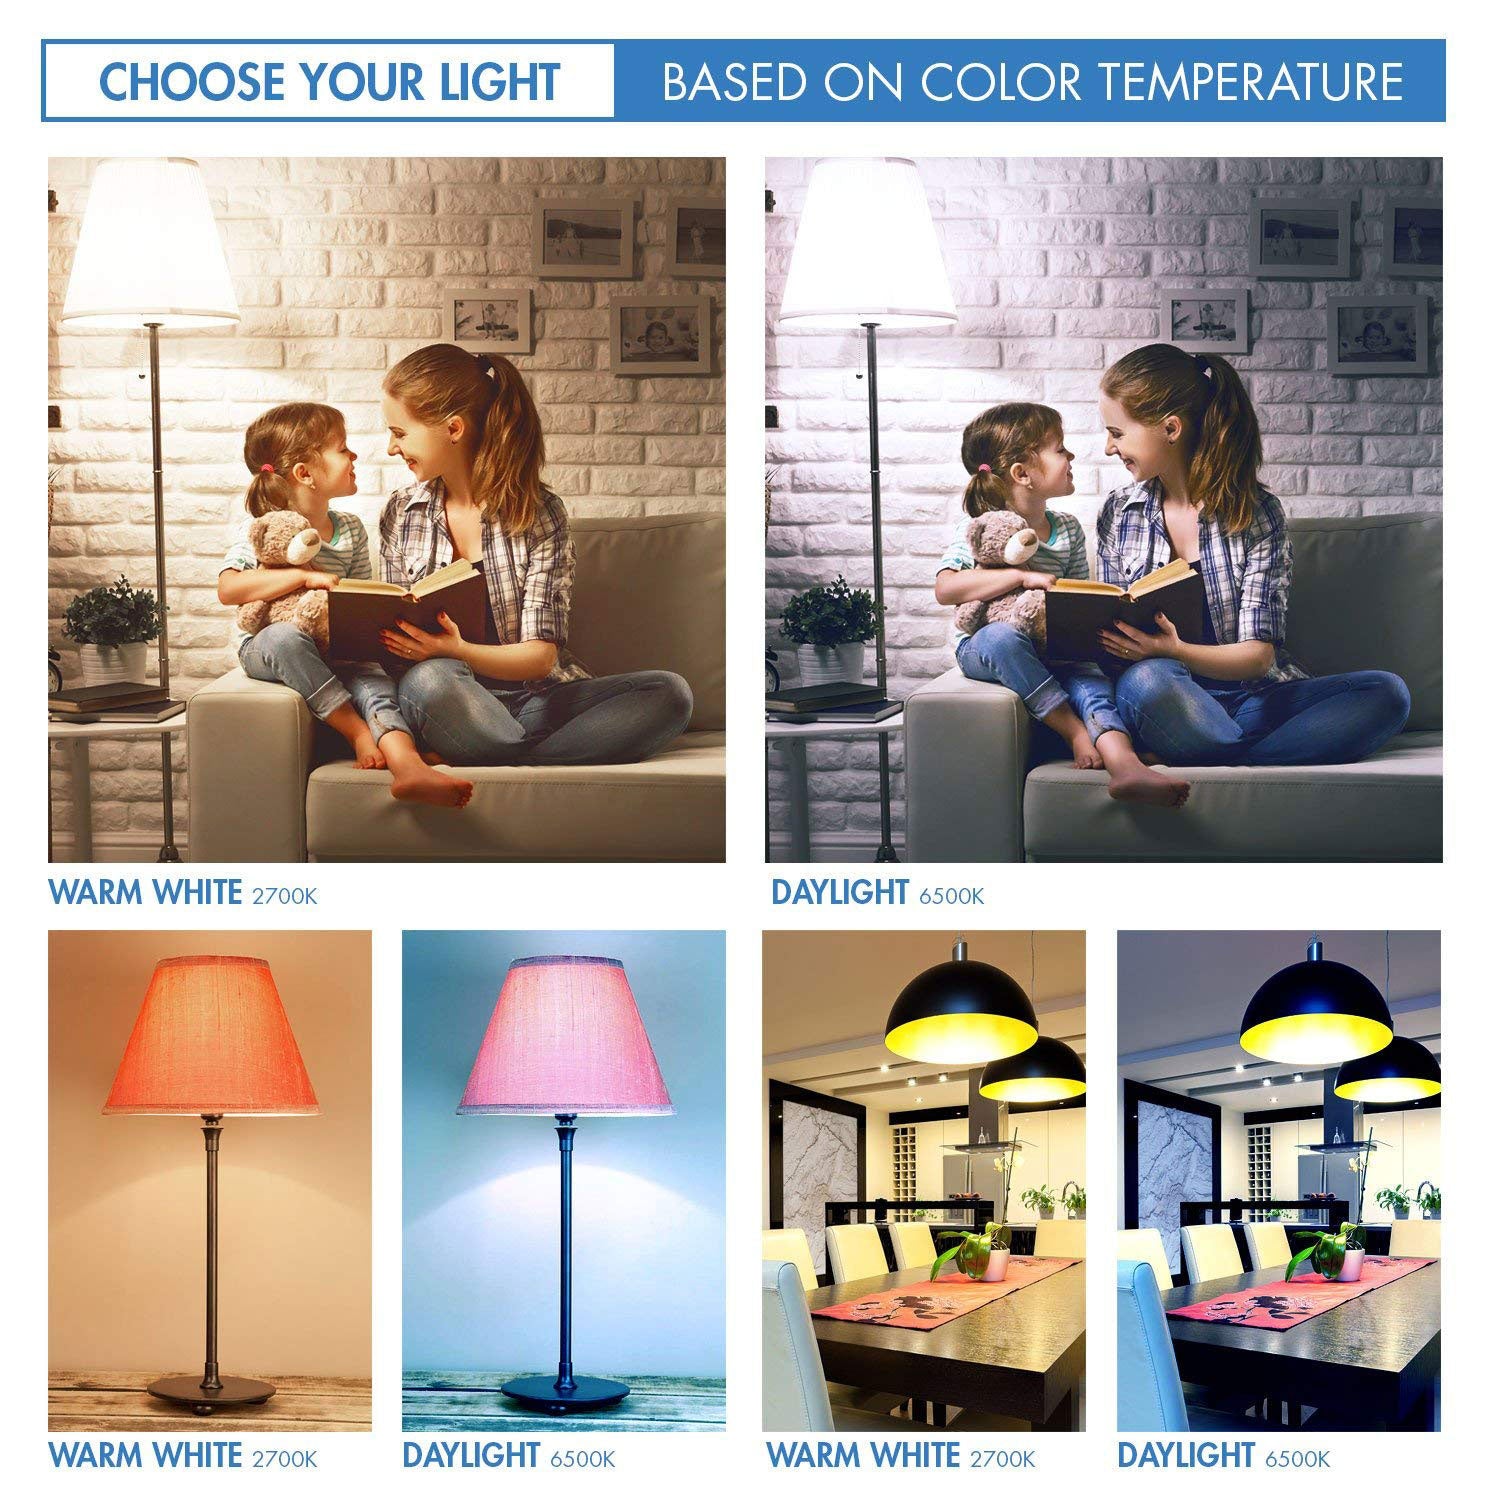 Choose your lights and see the different color temperatures